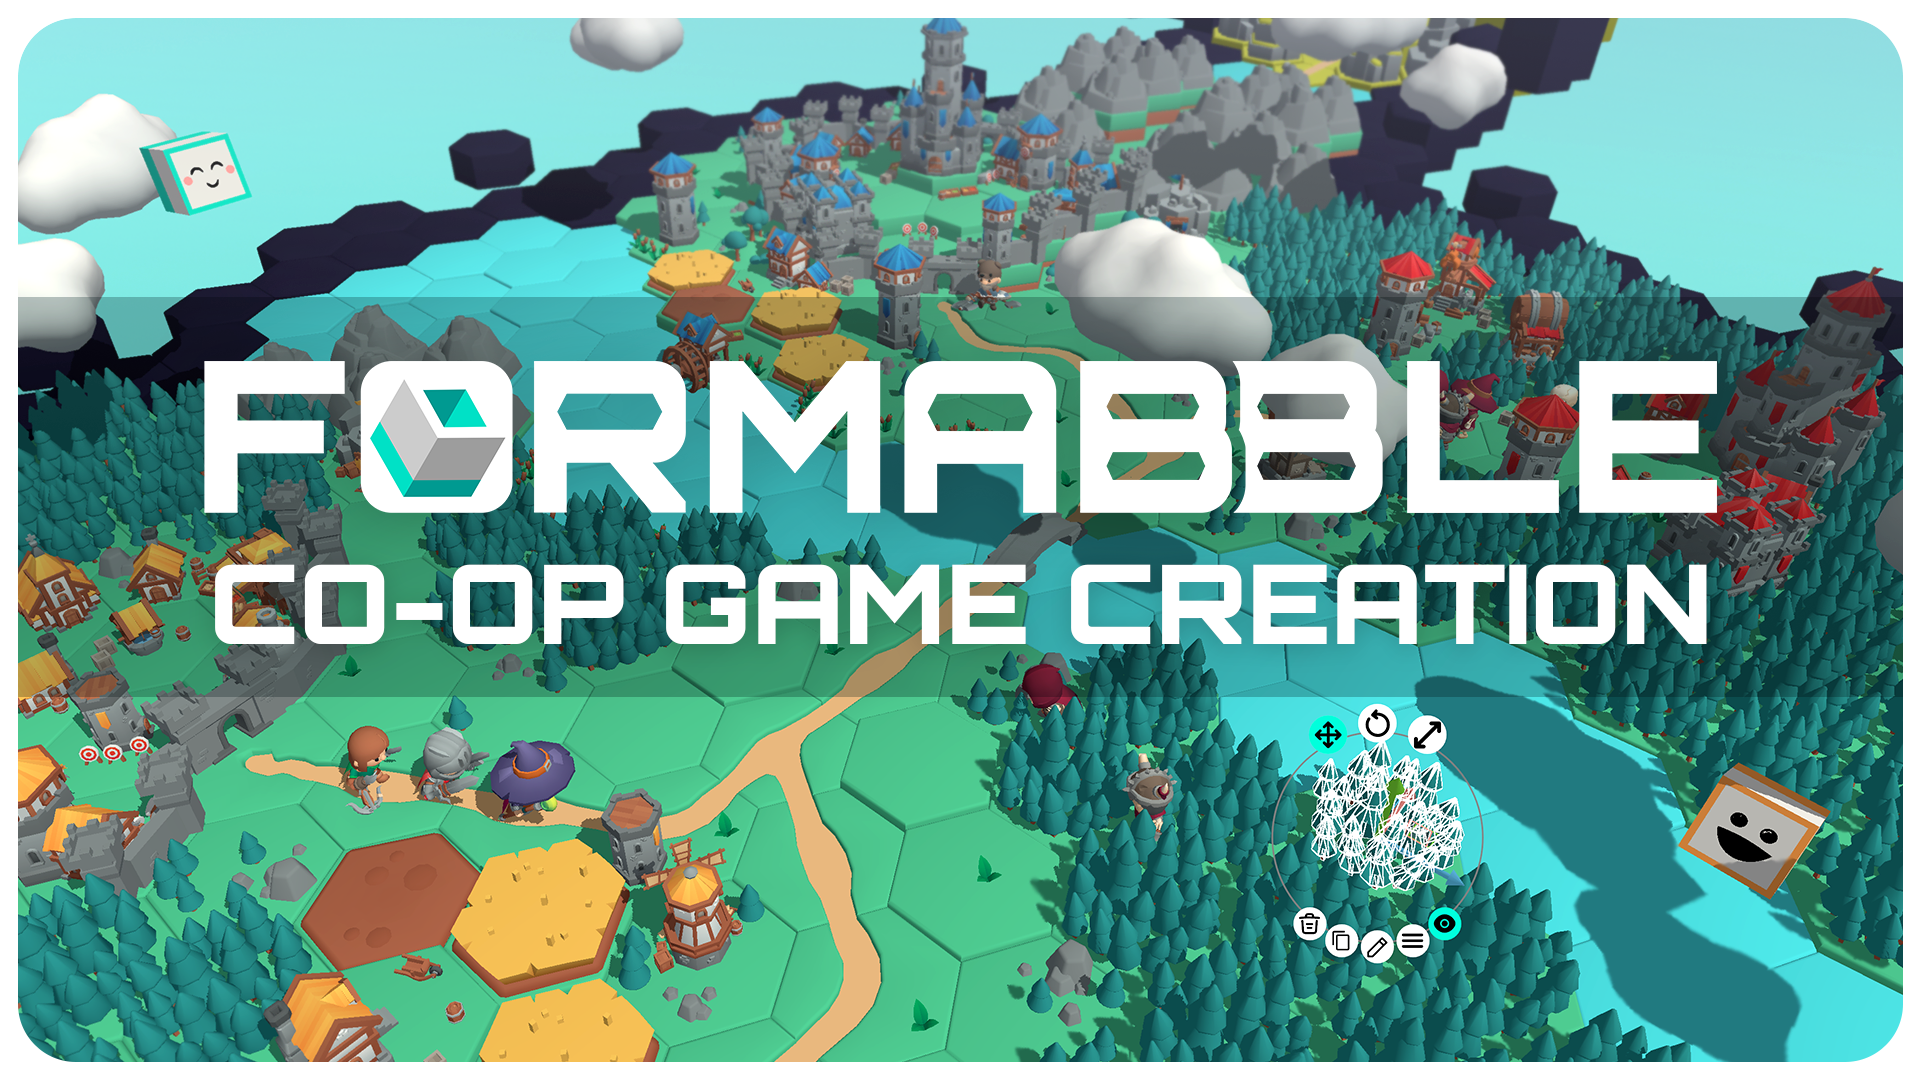 Formabble Co-op game creation splash